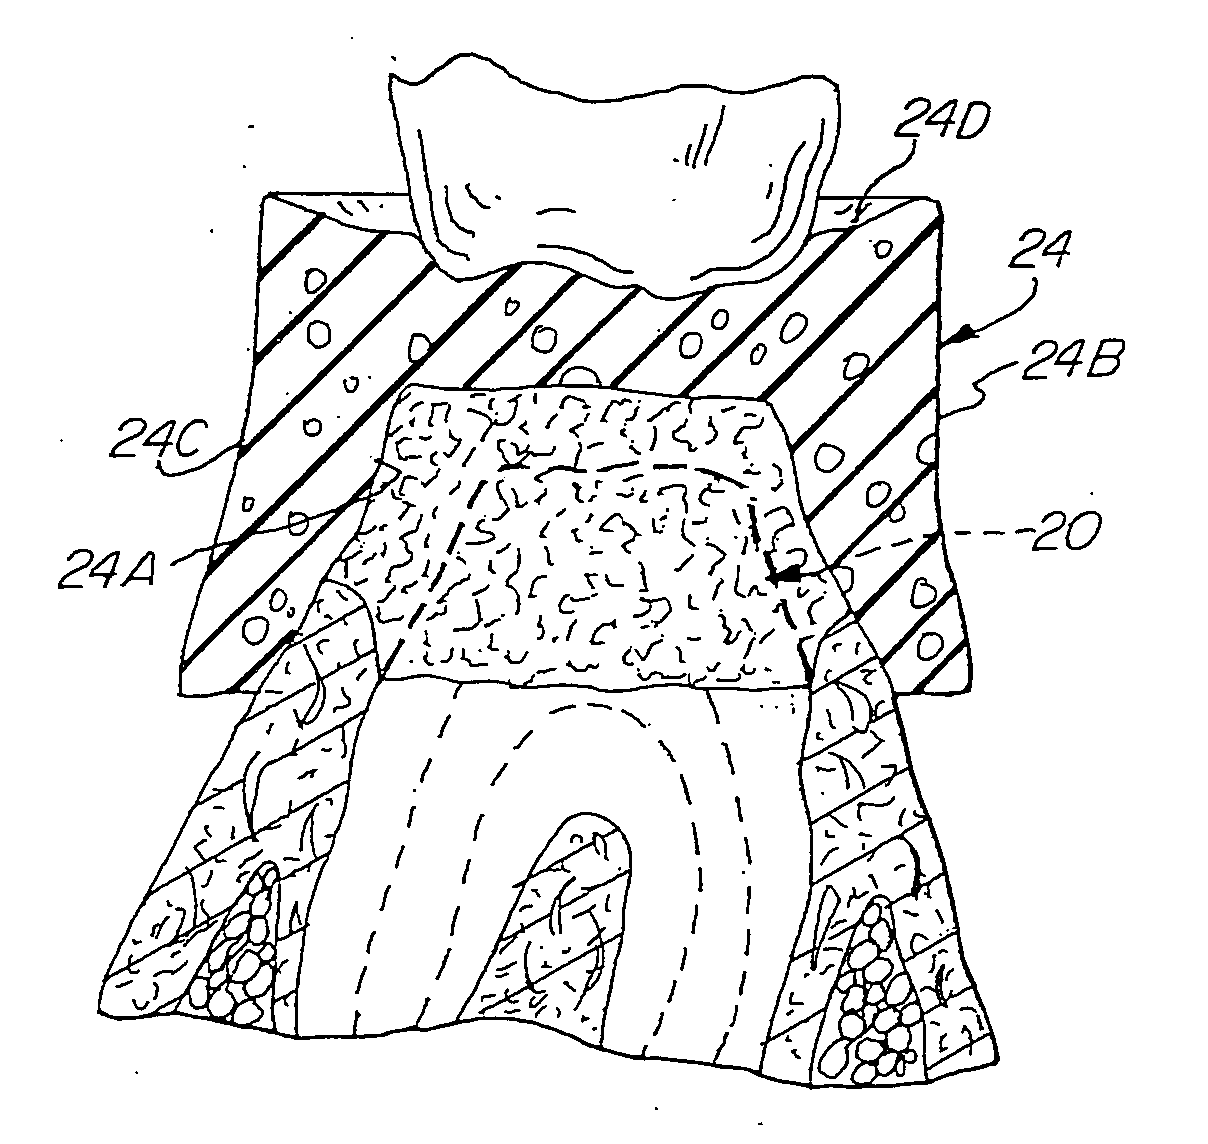 Method and device for the retraction and hemostasis of tissue during crown and bridge procedures